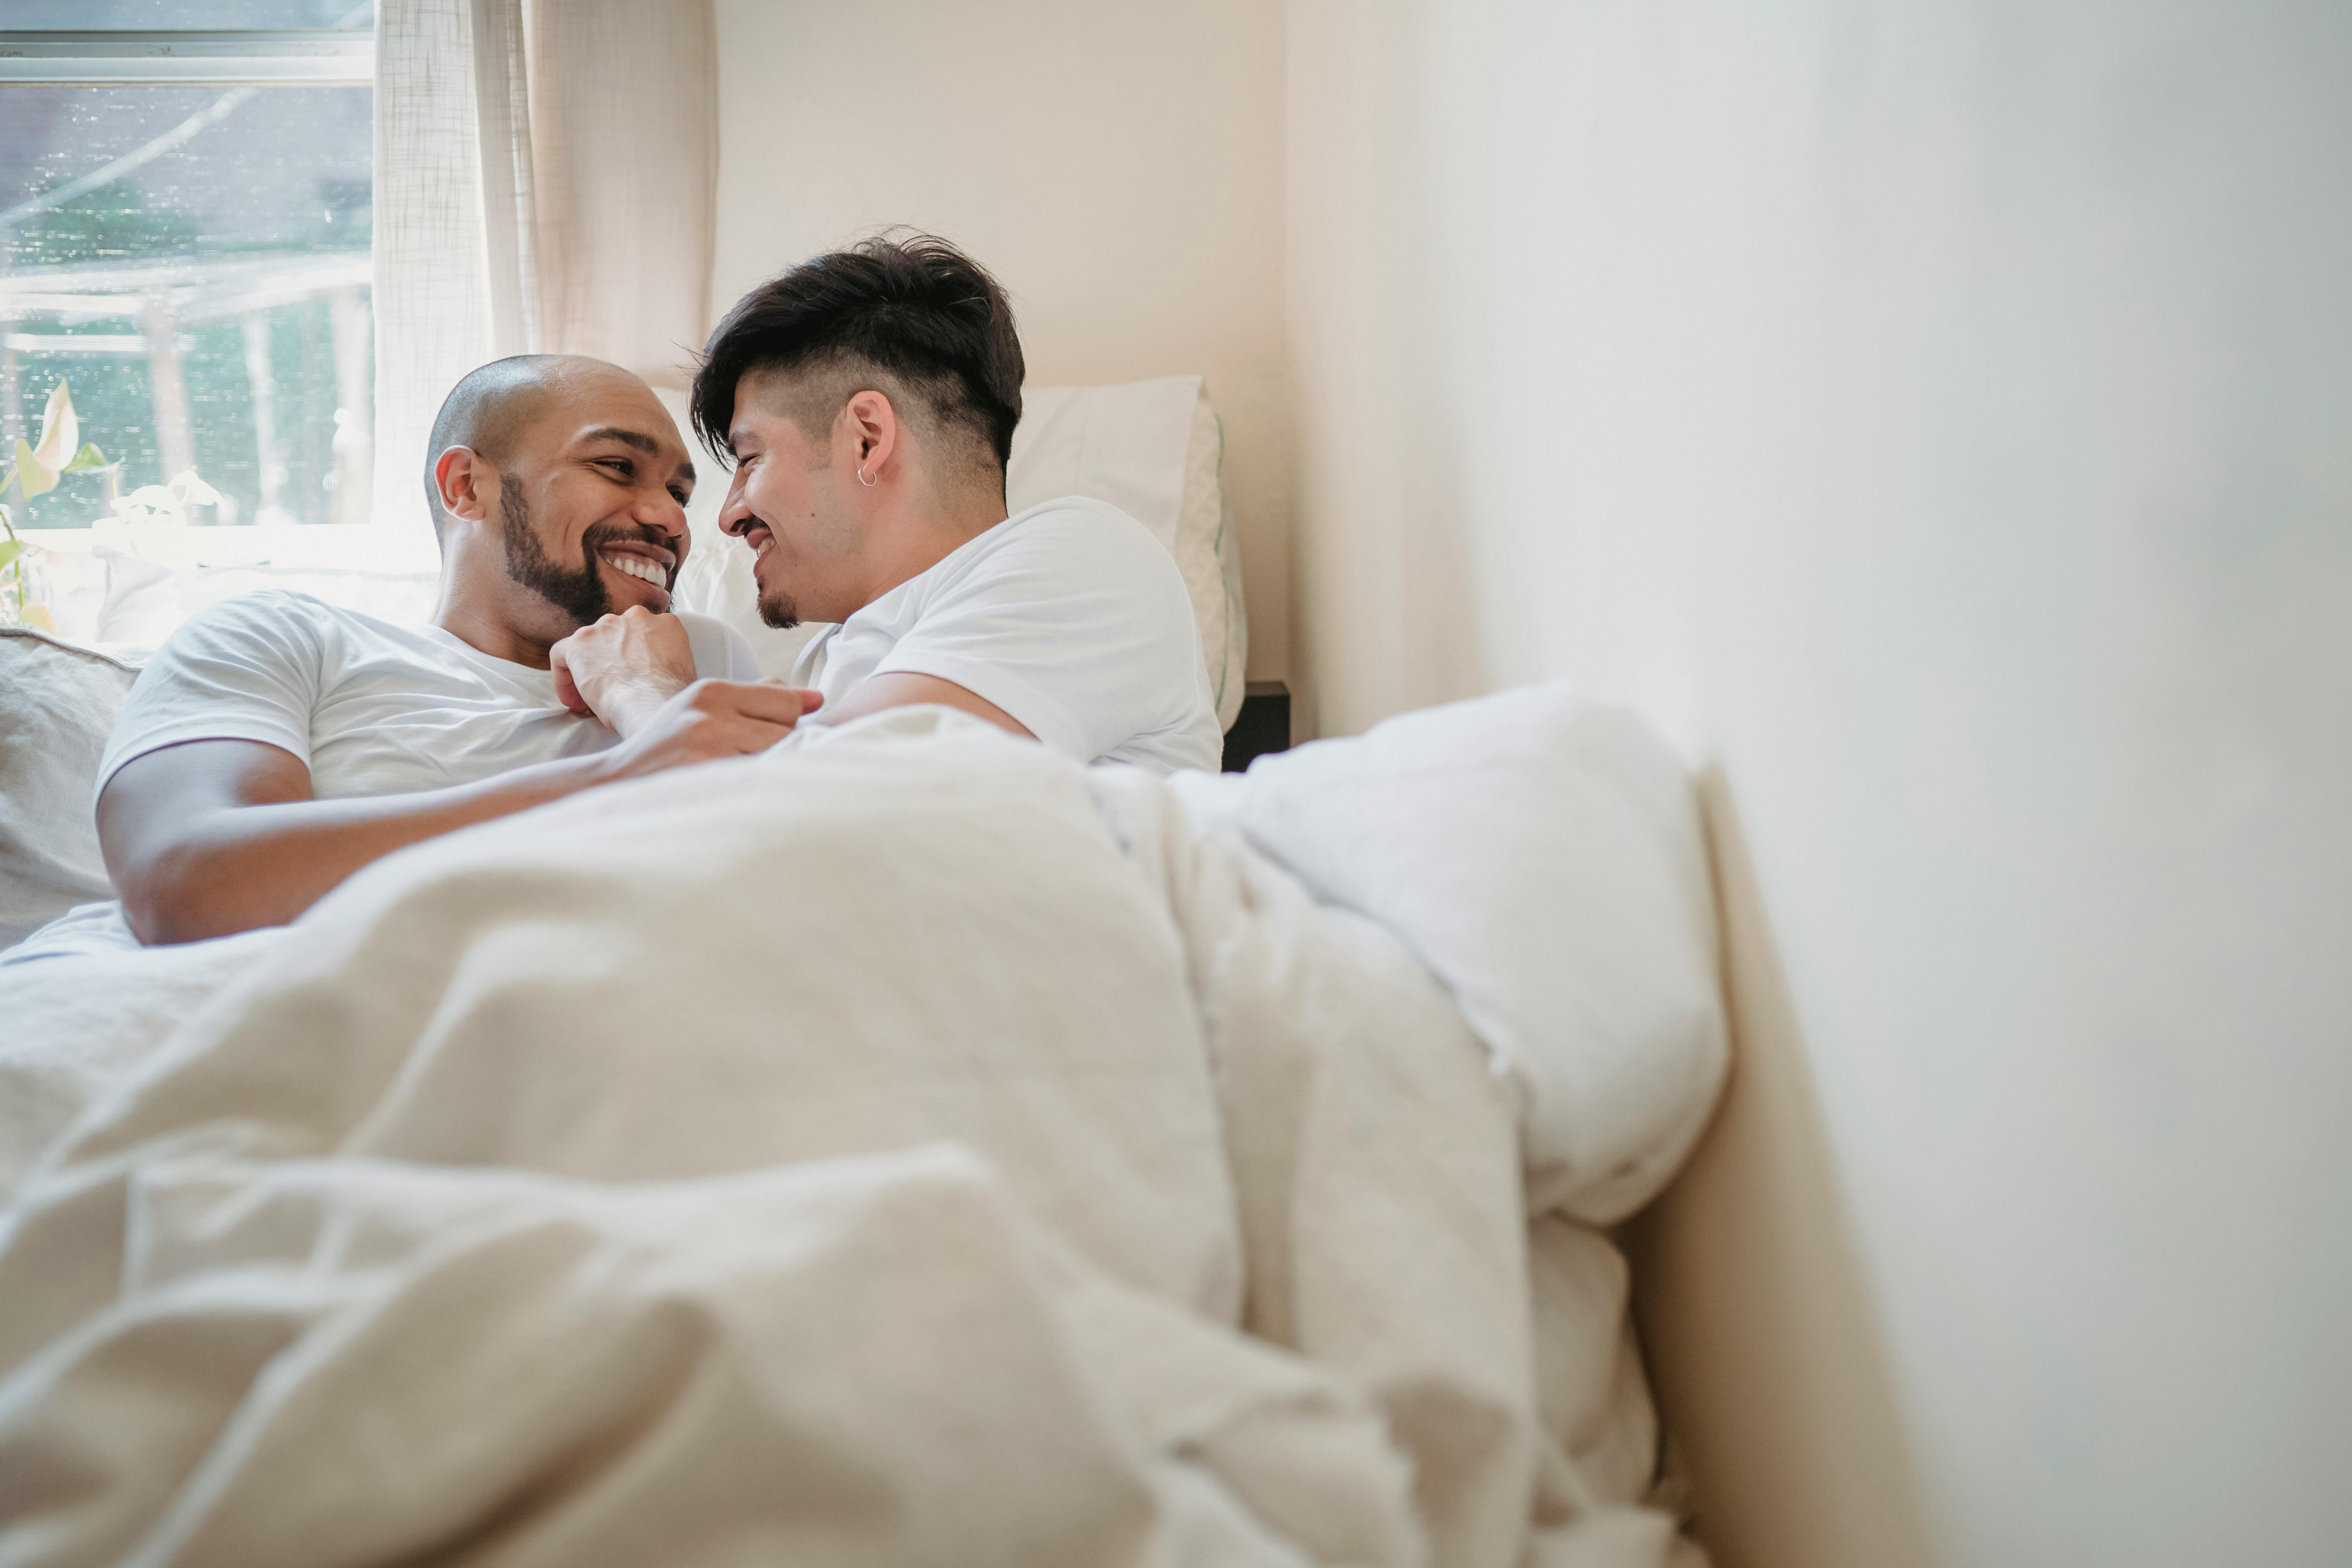 two men smiling in bed together